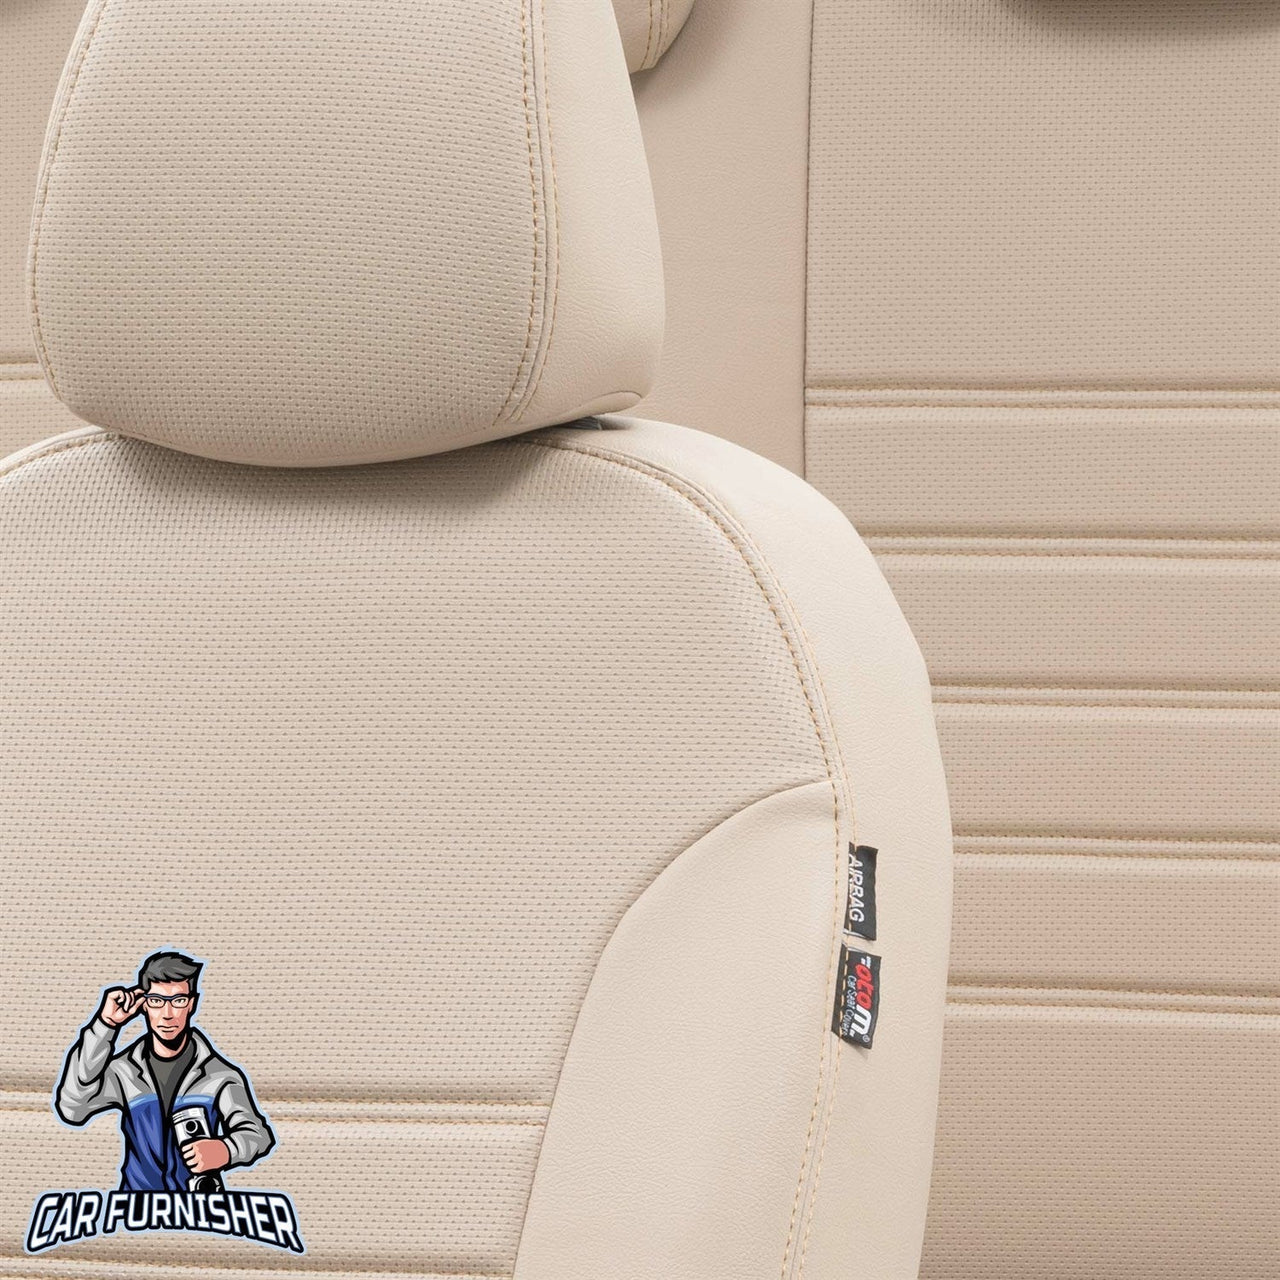 Dacia Spring Seat Covers New York Leather Design Beige Leather